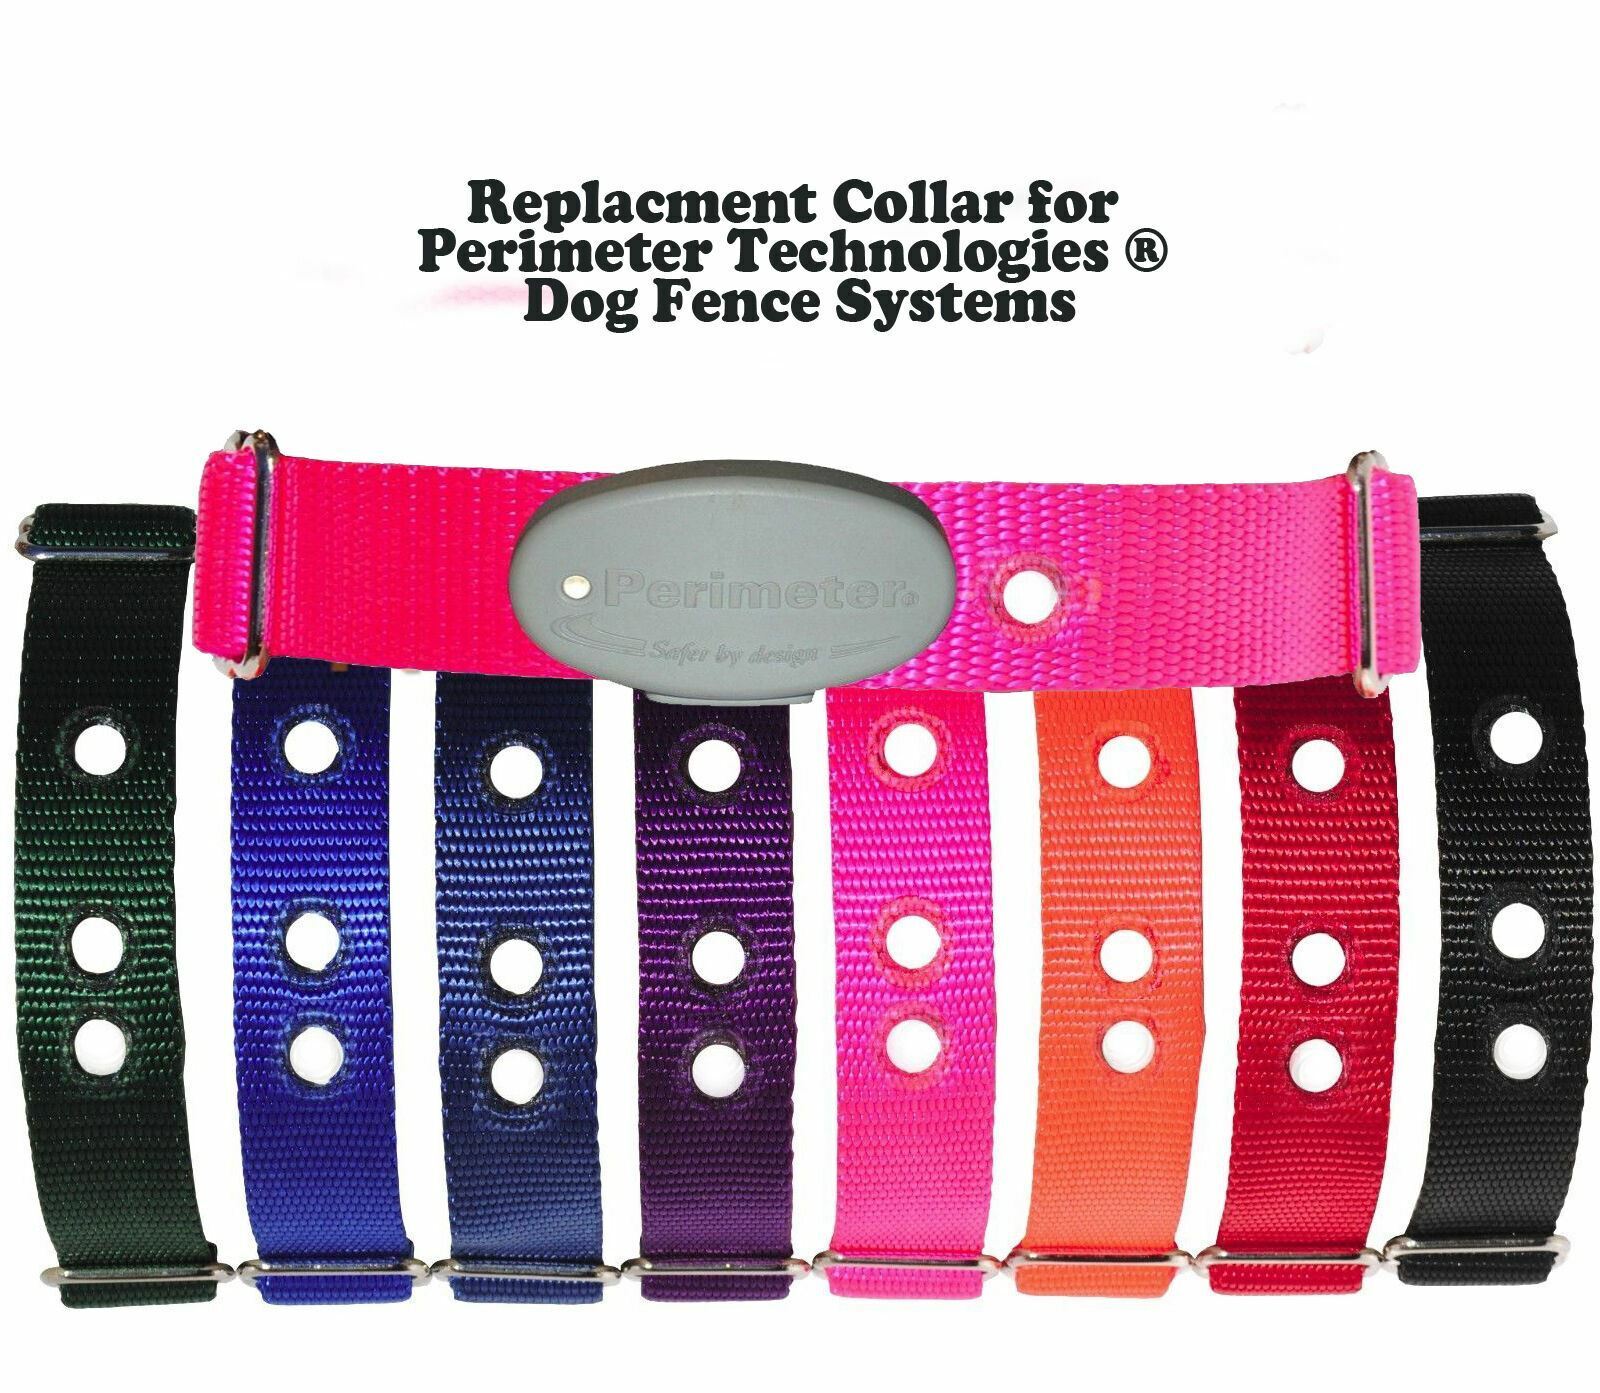 Replacment Collar for Perimeter Technologies ® Dog Fence Systems pick your color eBay